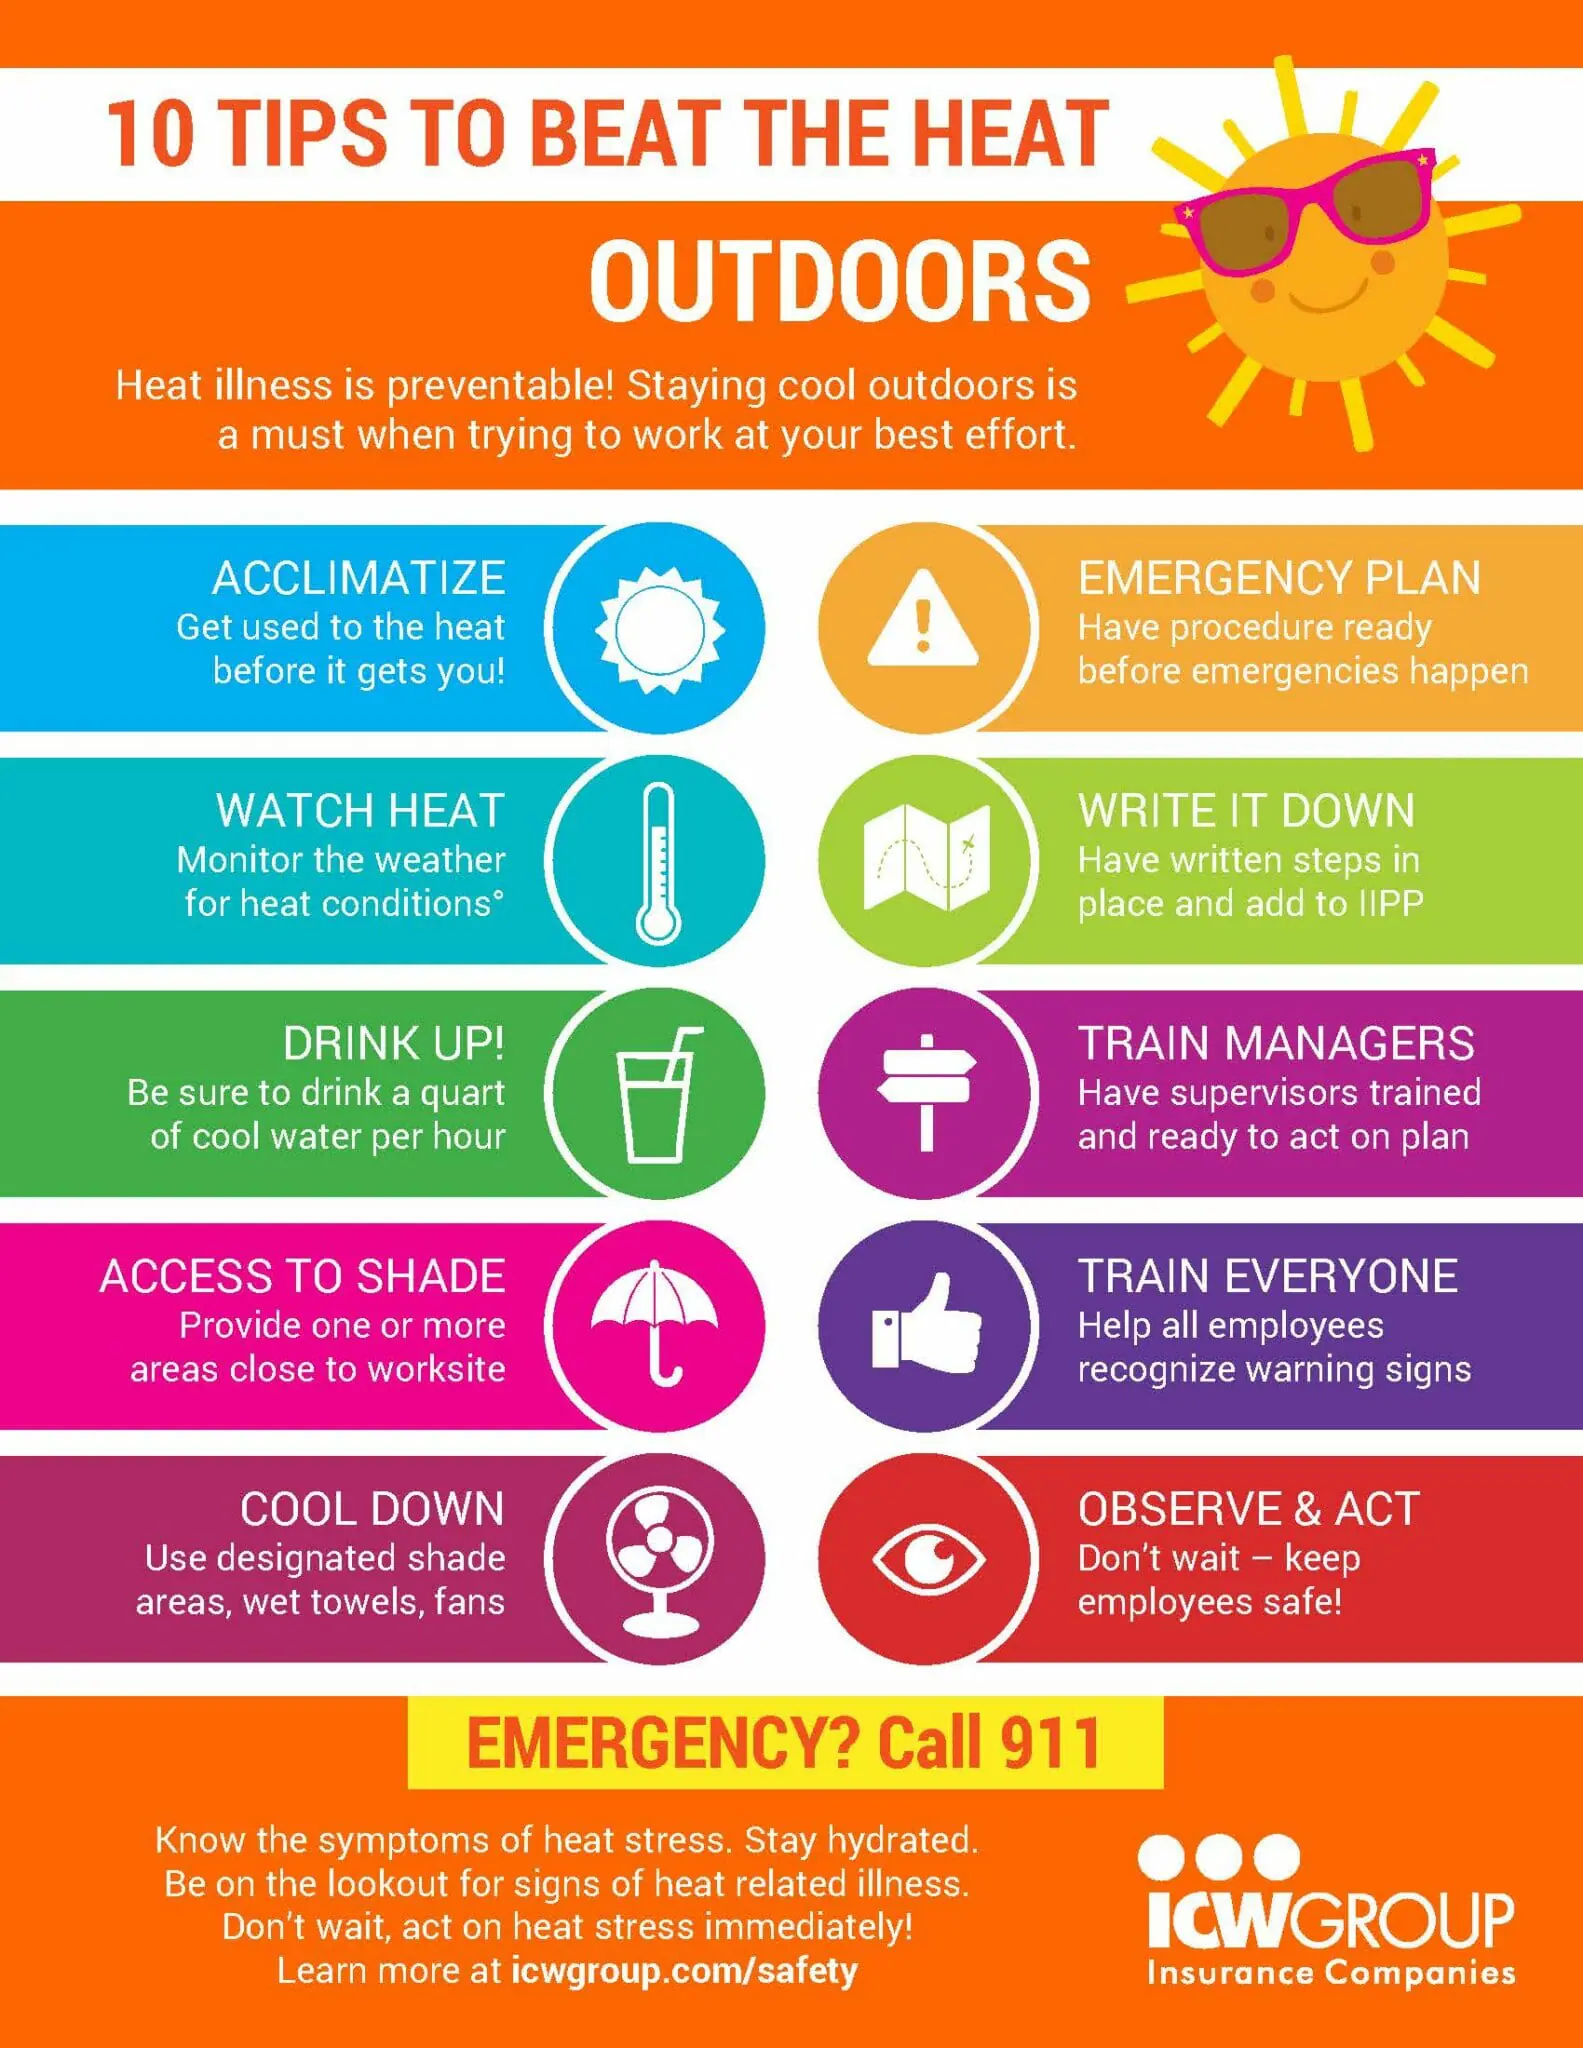 https://www.colonybrands.com/wp-content/uploads/sites/24/2023/05/icw-group-10-tips-to-beat-the-heat-outdoors-1583x2048.jpg.webp